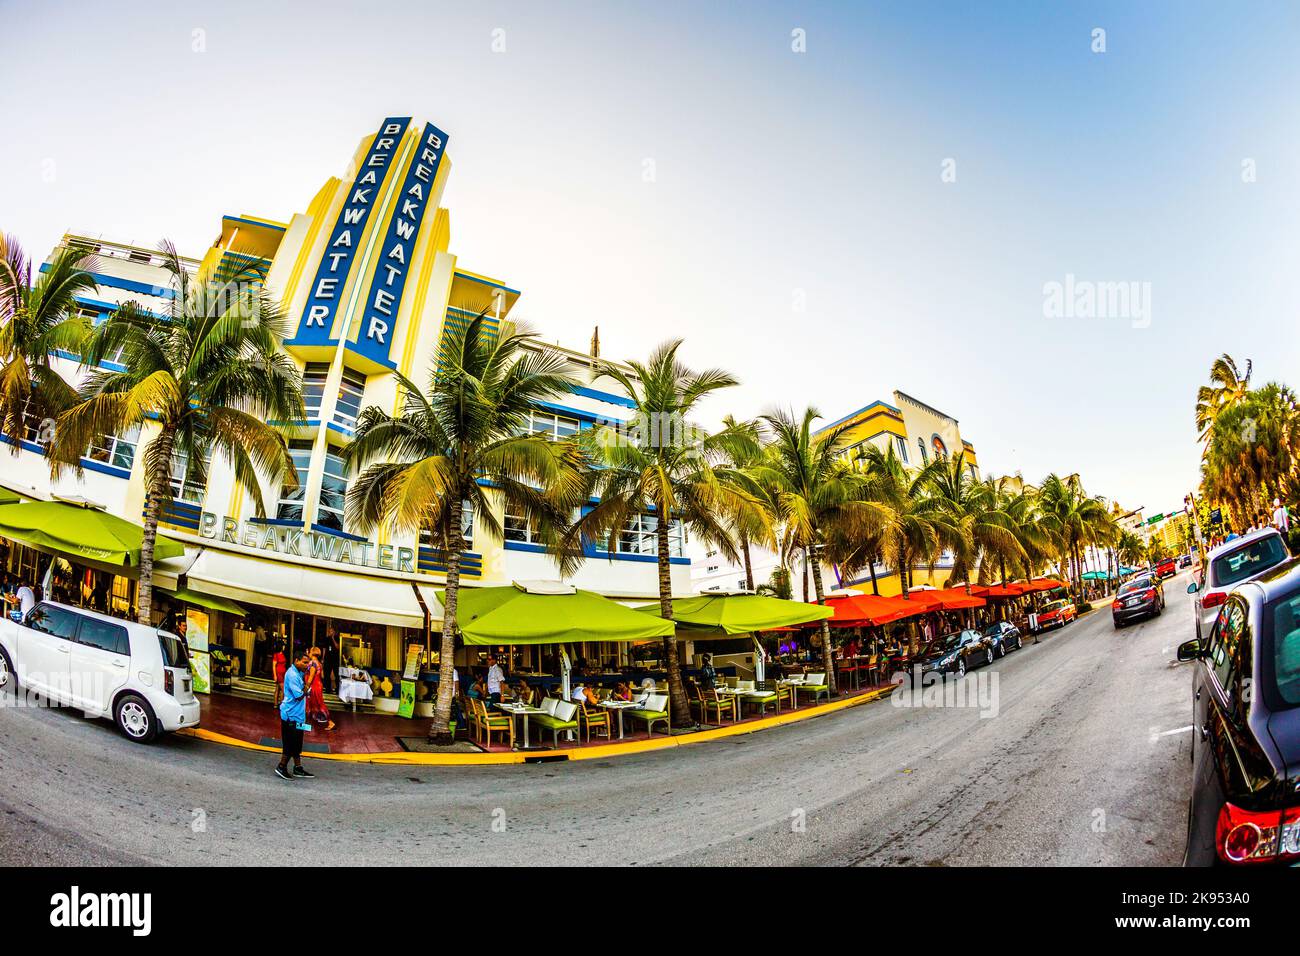 MIAMI, USA - July 31:  famous Breakwater hotel located at  Ocean Drive was built in the 1930's in South Beach July 31 2013 in Miami, USA. Most of the Stock Photo